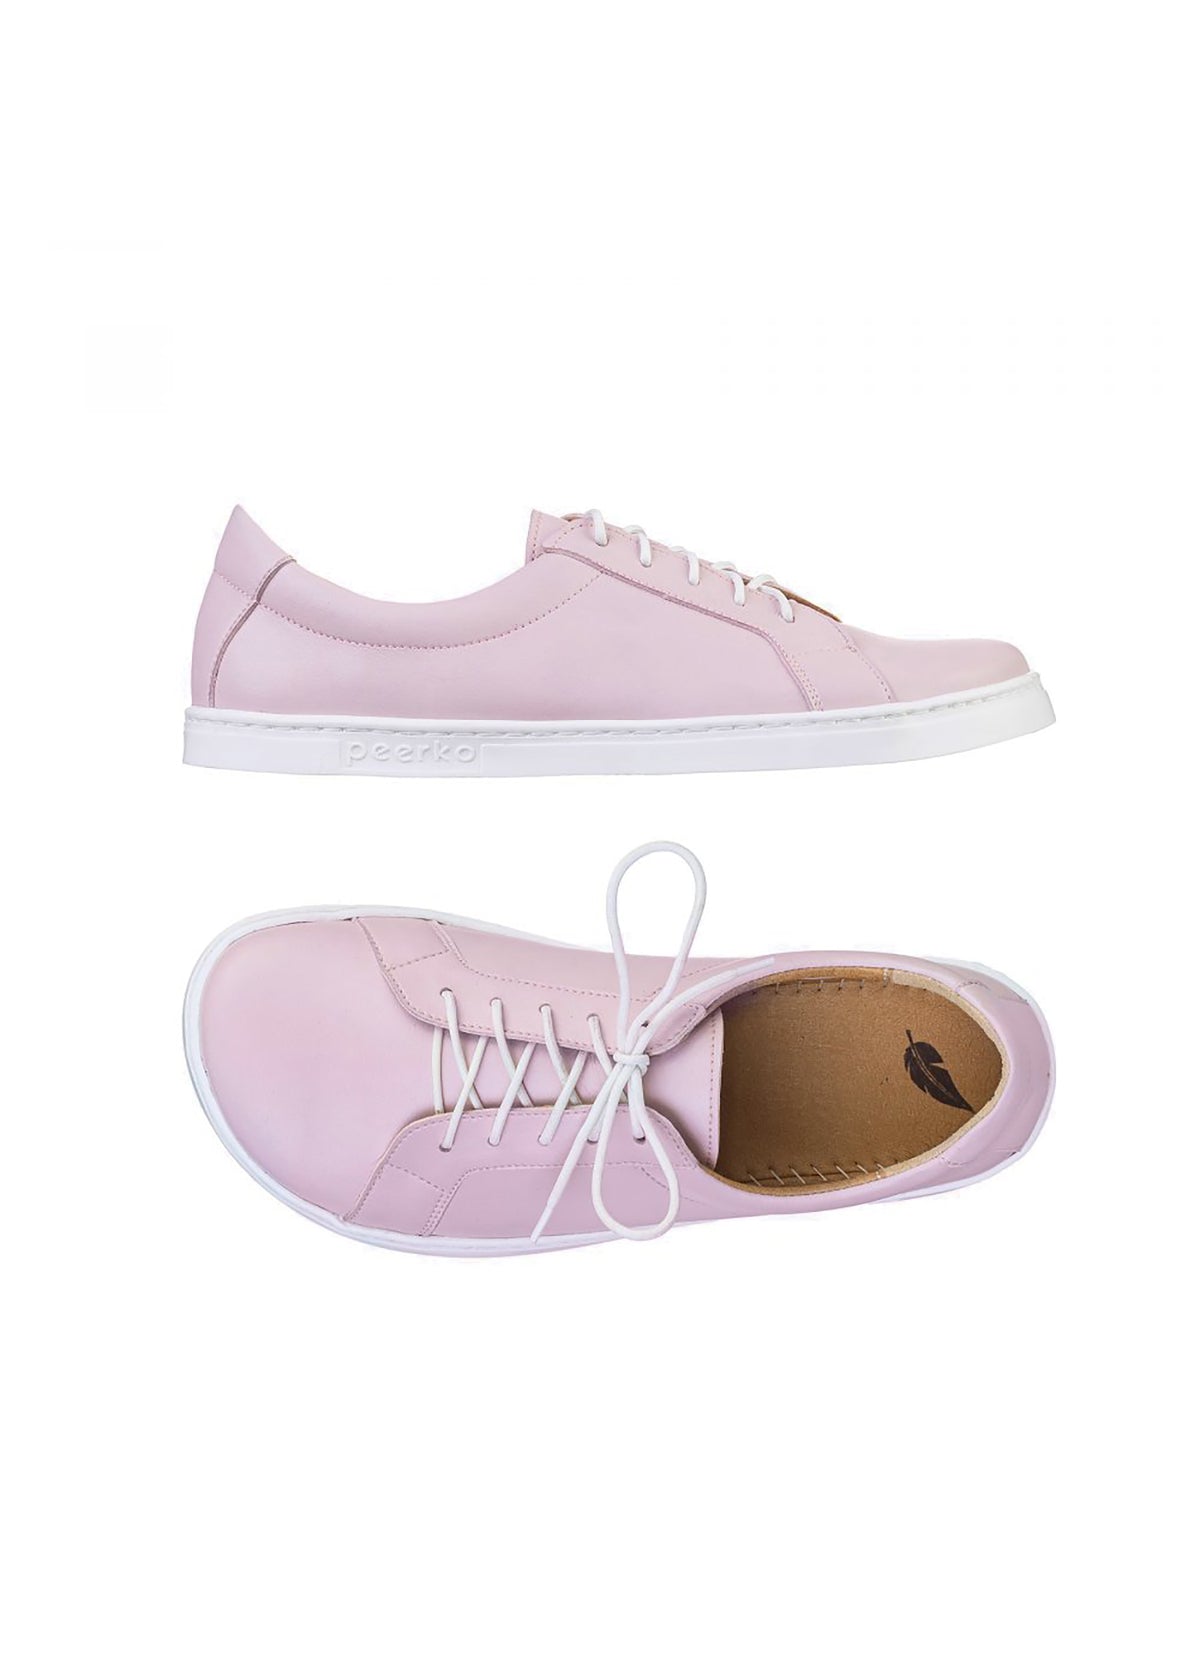 Barefoot shoes, Low-top sneakers - Classic Blossom, pink, vegan